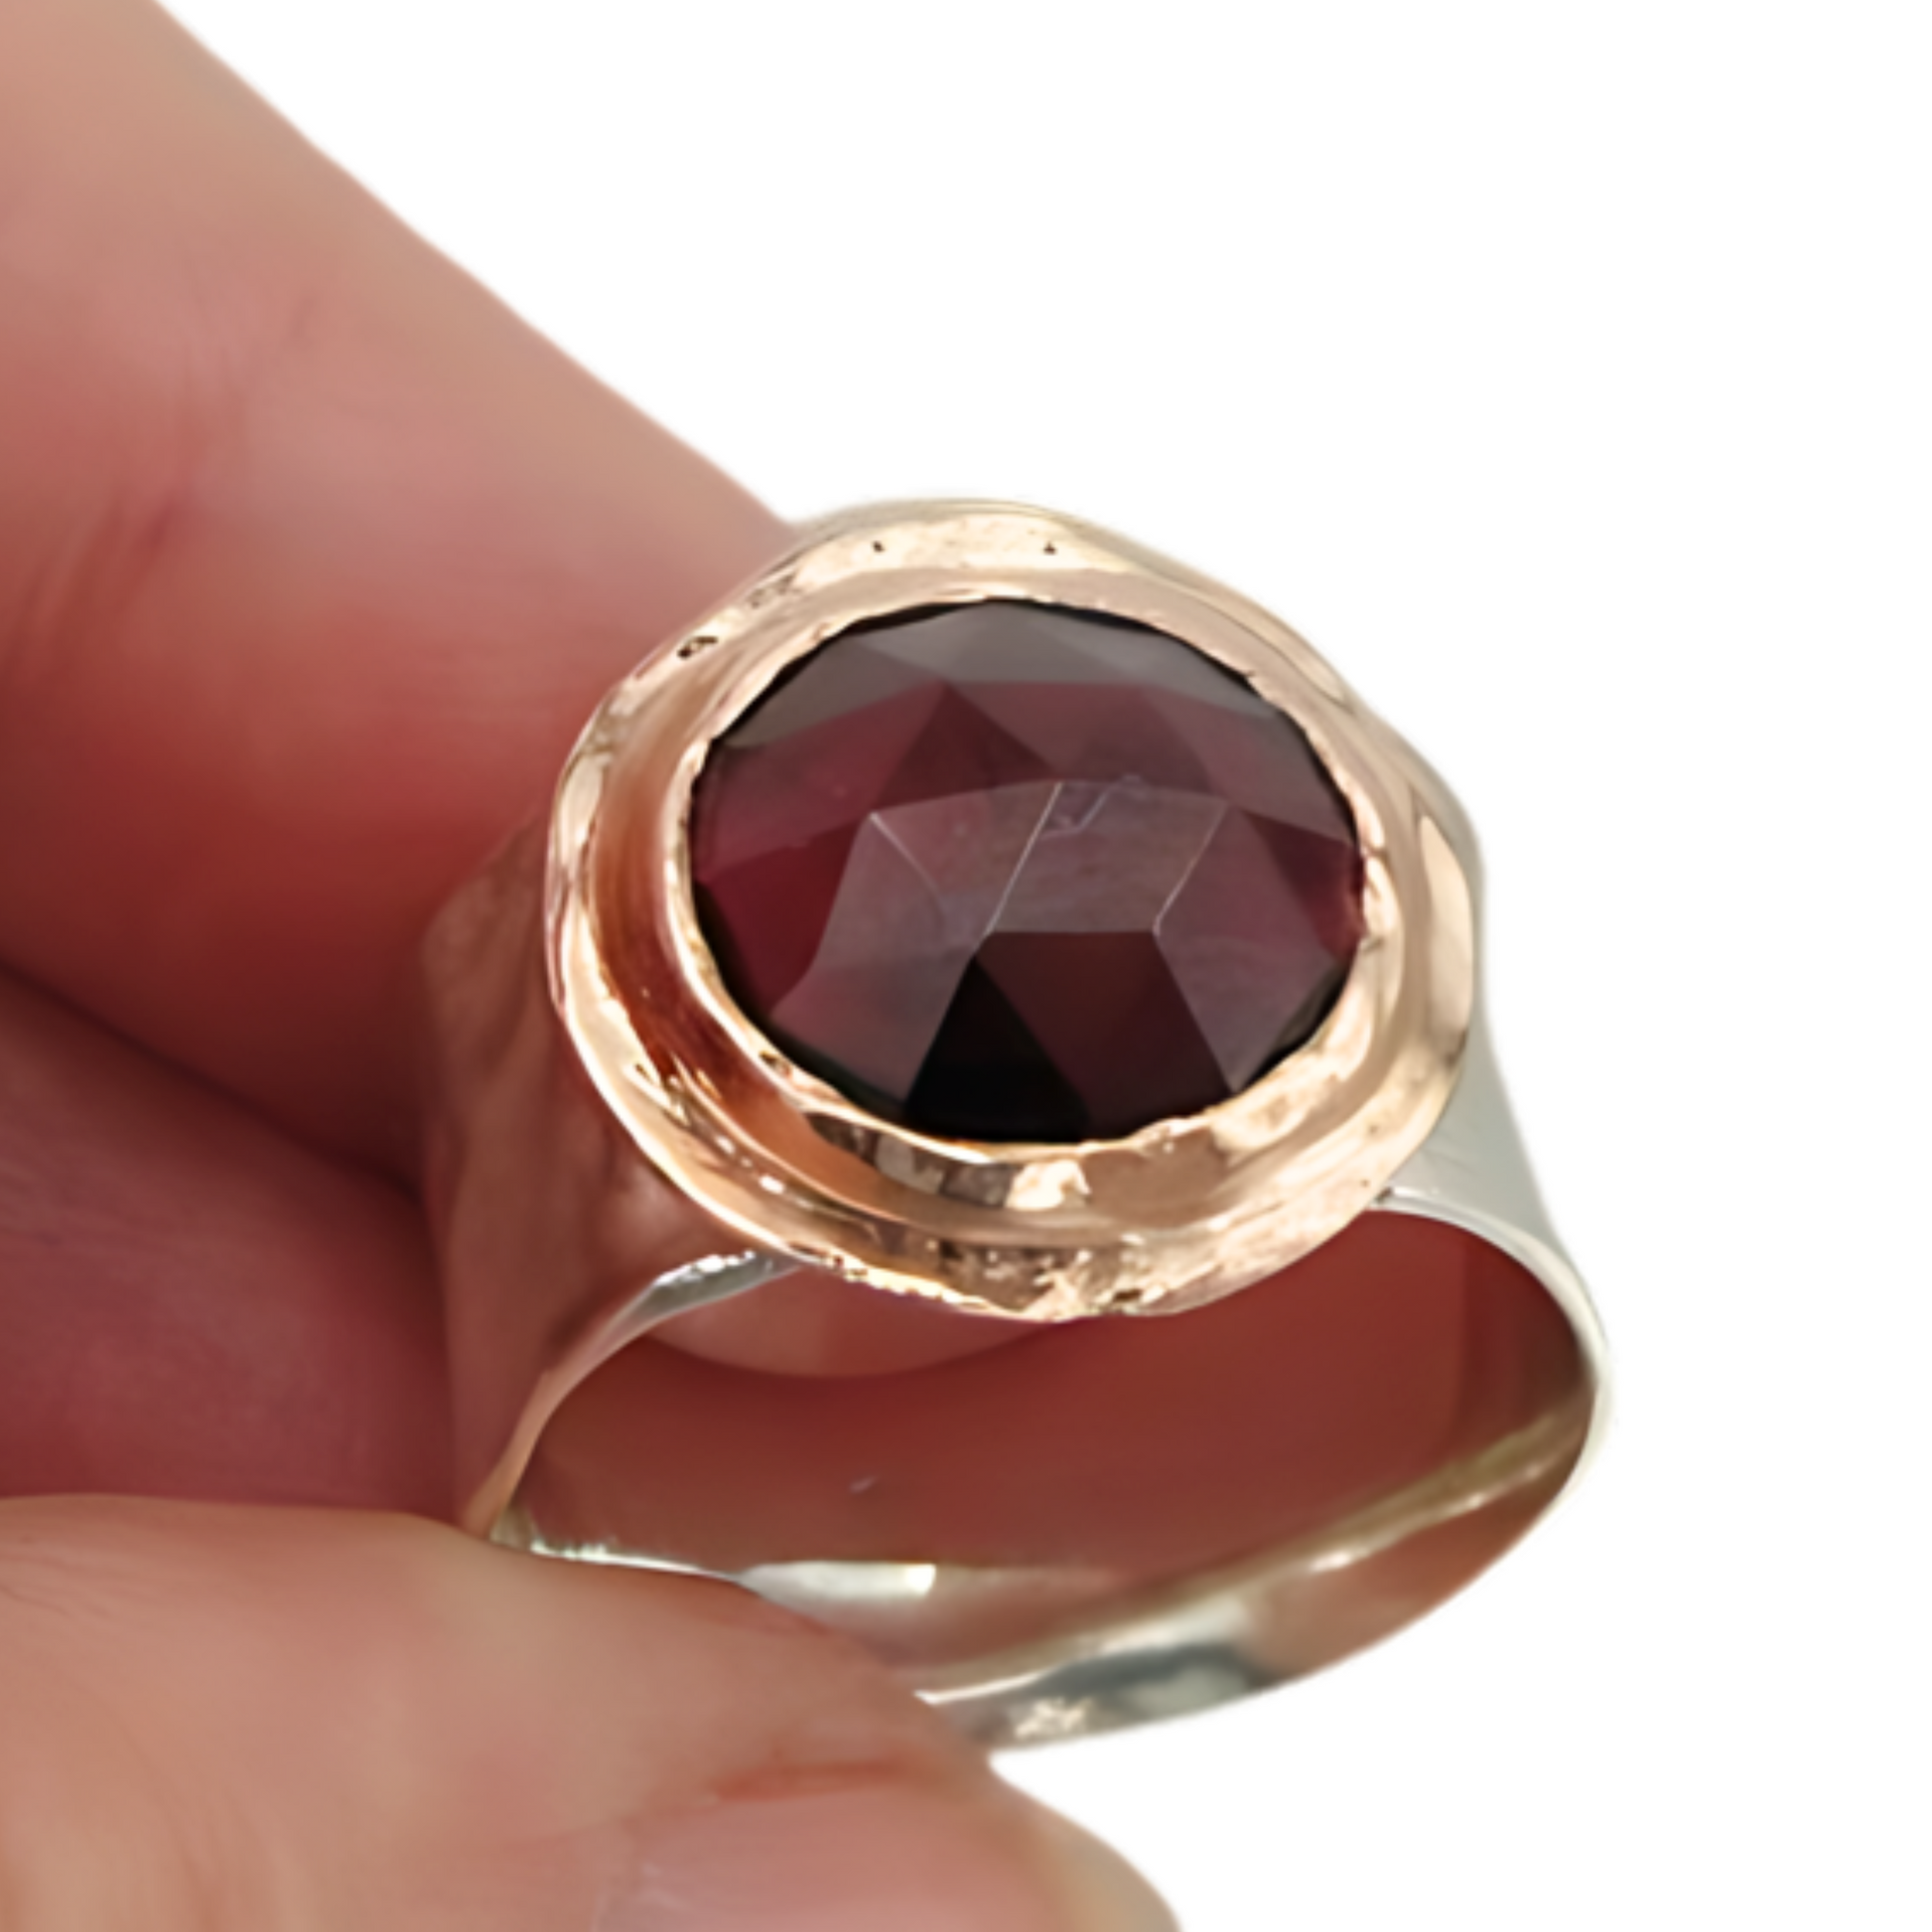 Sculptural sterling silver Ring with Natural Garnet gemstones, decorated with 9K Red Gold<br>Wide Ring, silver &amp; gold ring, statement ring.